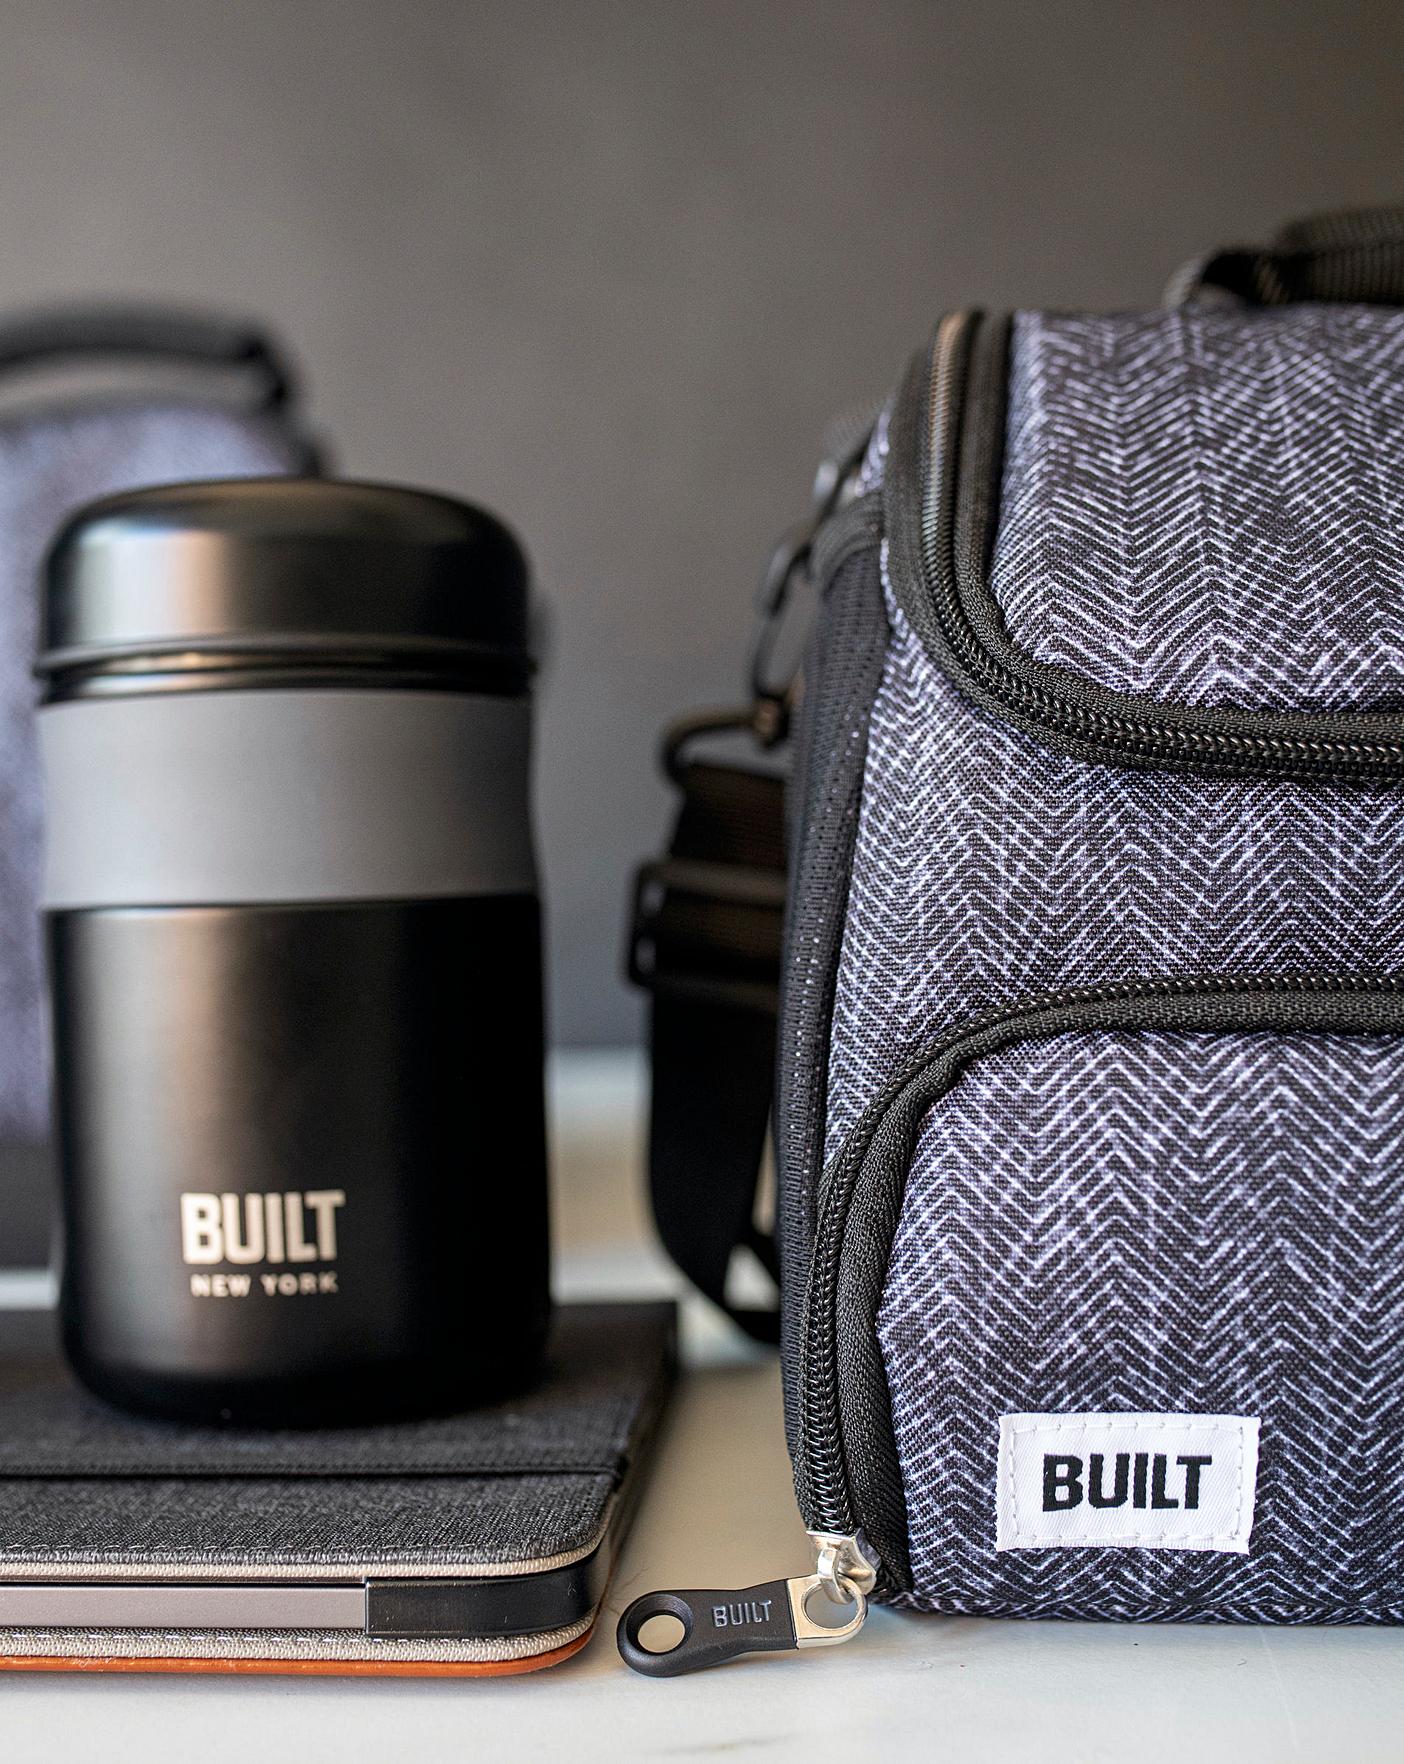 Built for Athletes Pro Series Backpack – The Ultimate Gym Bag?